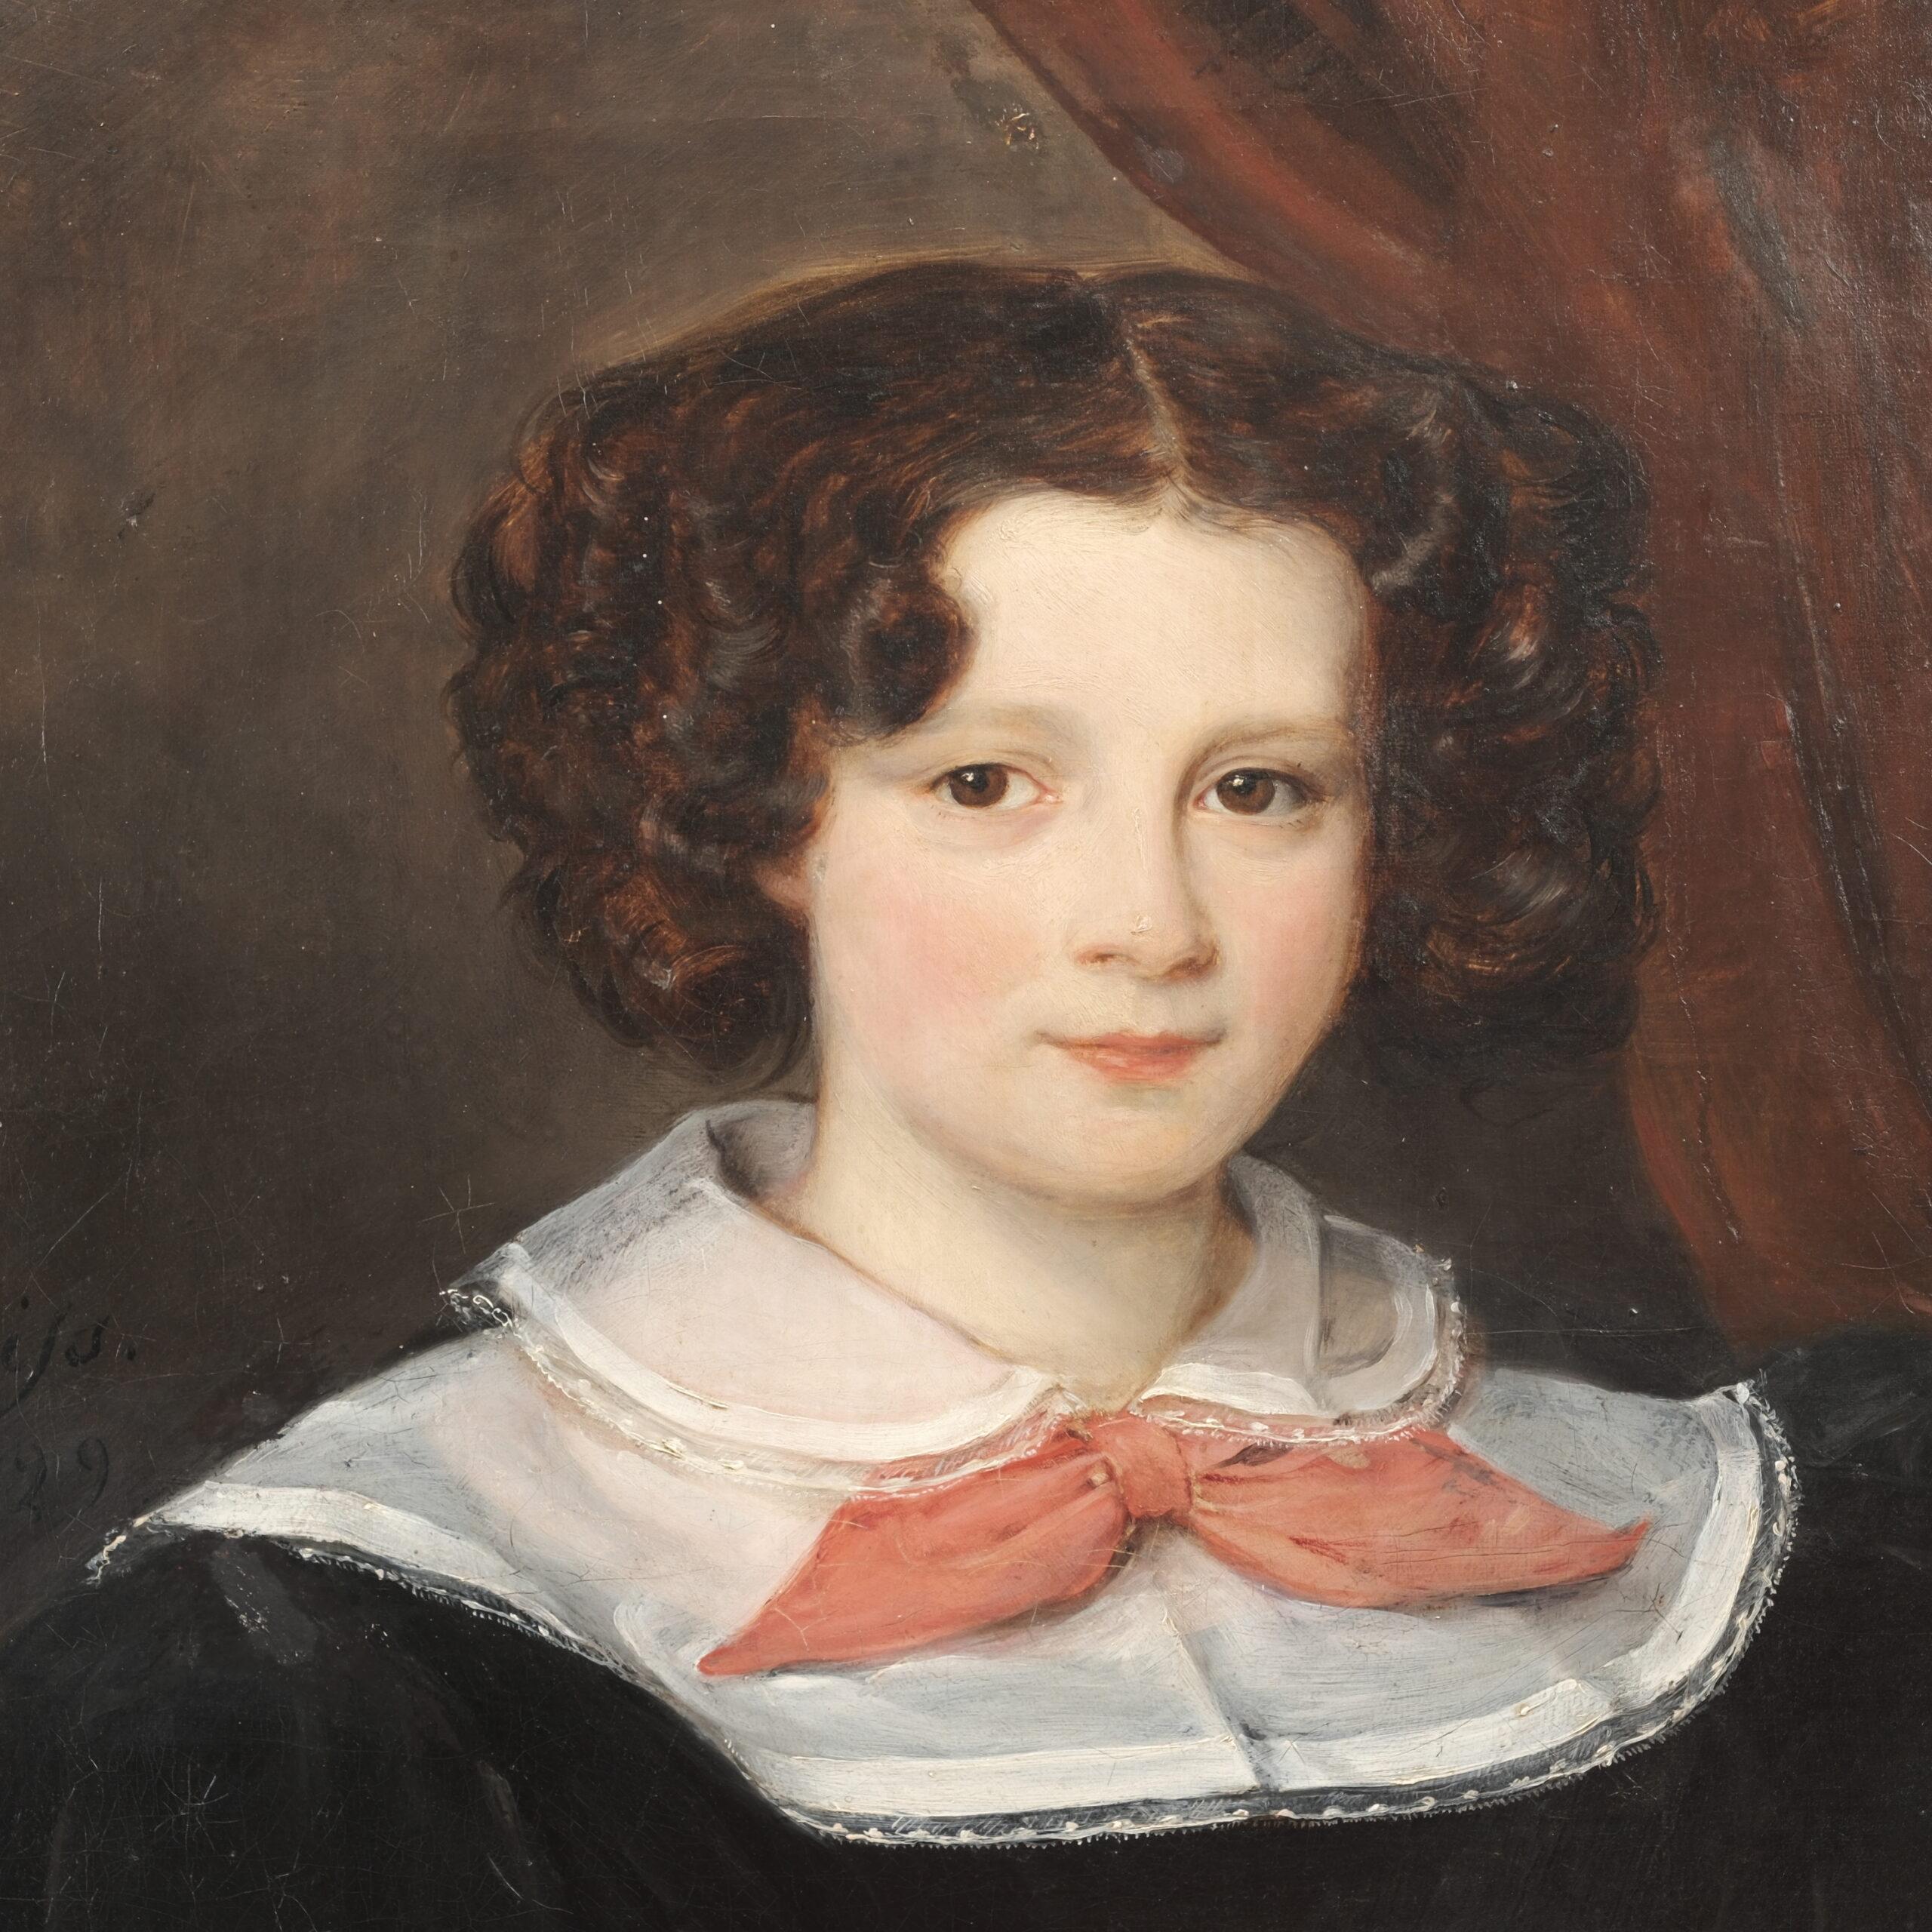 Francois Nicholas Riss (1804-1886)

Portrait of a child

signed and dated center left, Riss 1829, oil on canvas, partly retouched, stretcher renewed, framed

Dimensions: height 62 cm - width 50,5 cm

François Nicholas Riss (1804 Moscow-1886